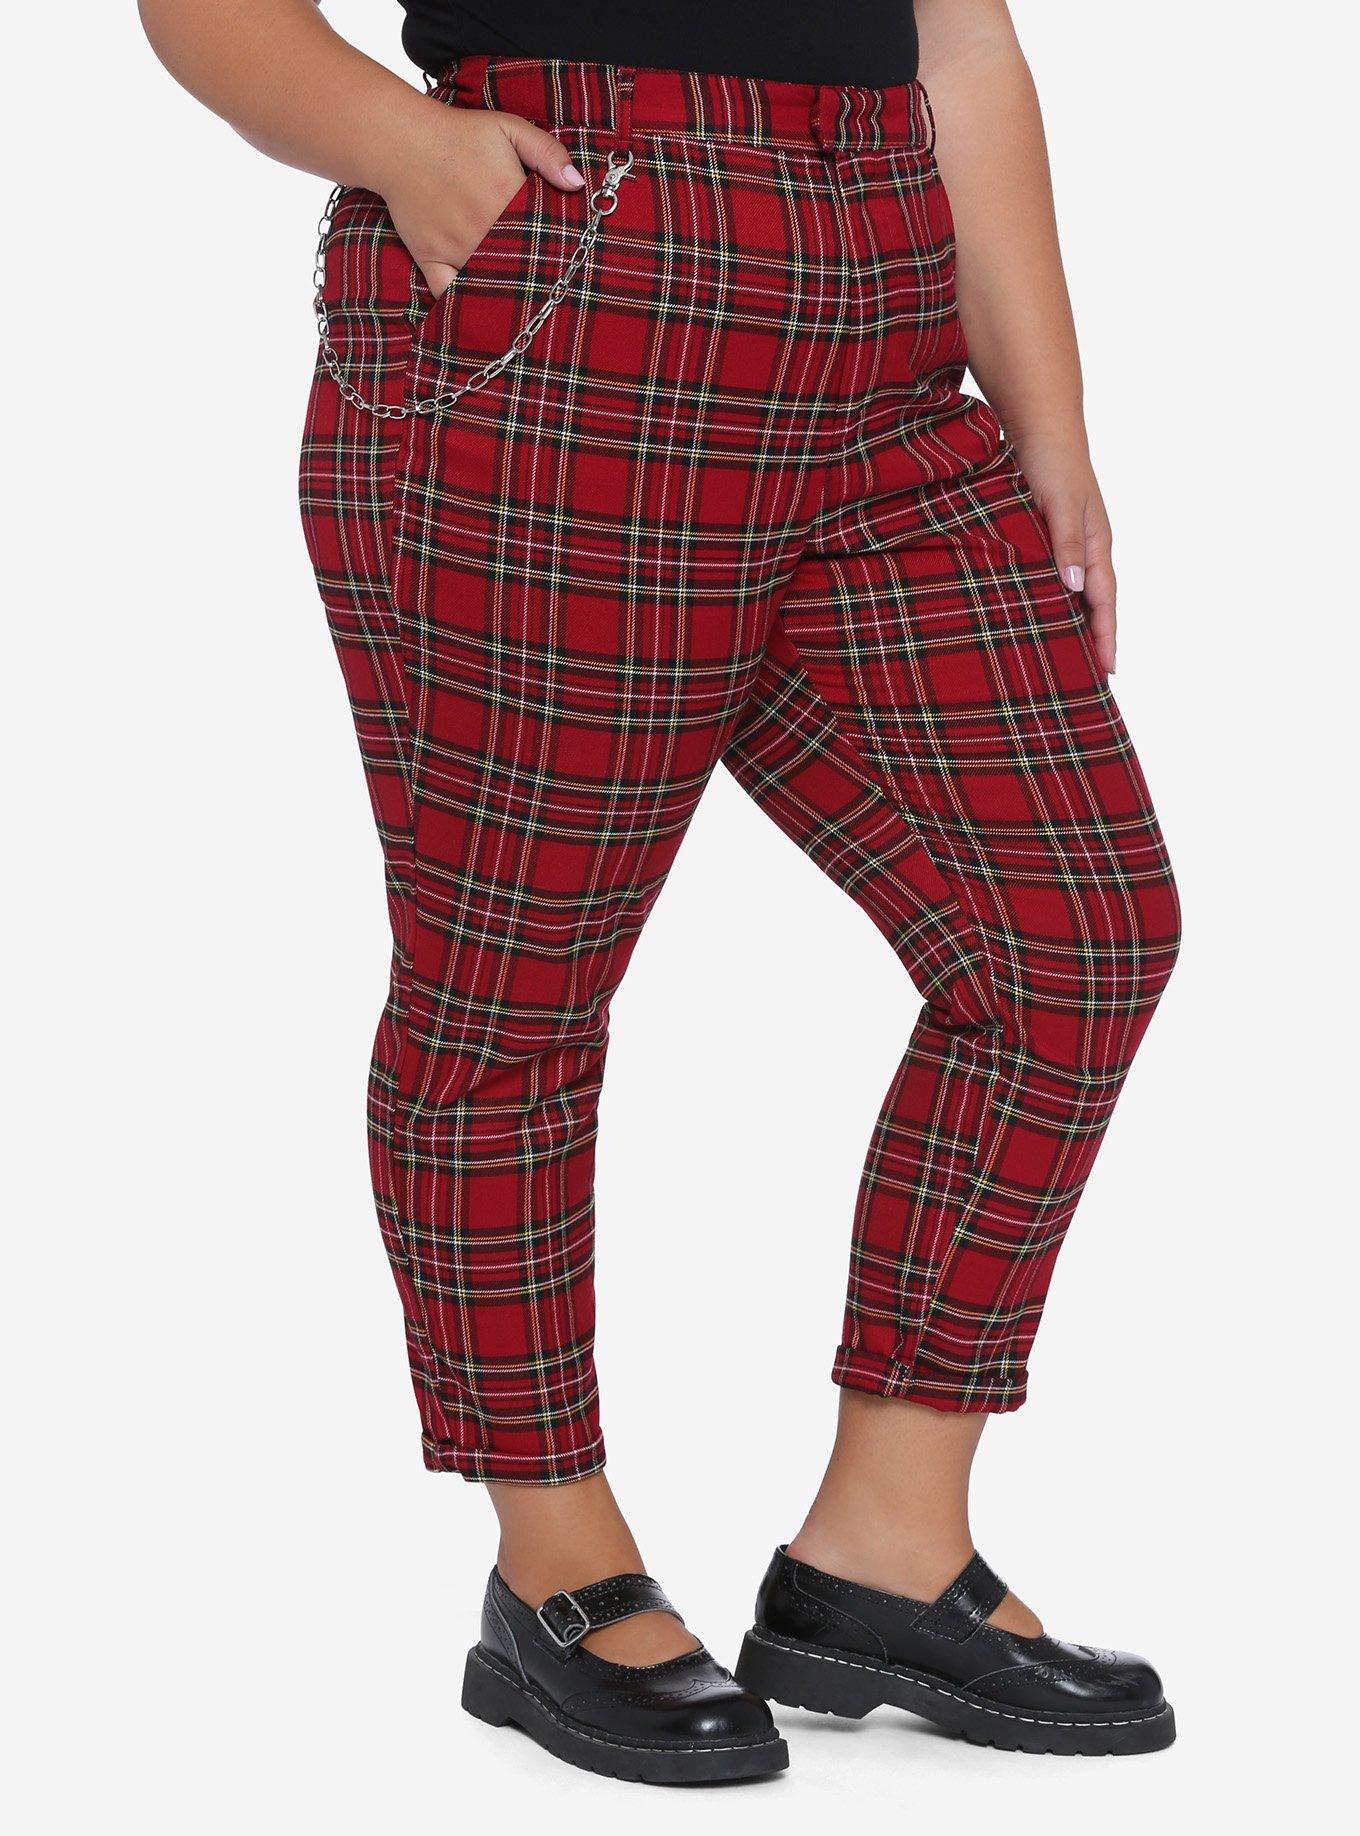 Hot Topic Women's punk red plaid pants with suspenders size 3 Small